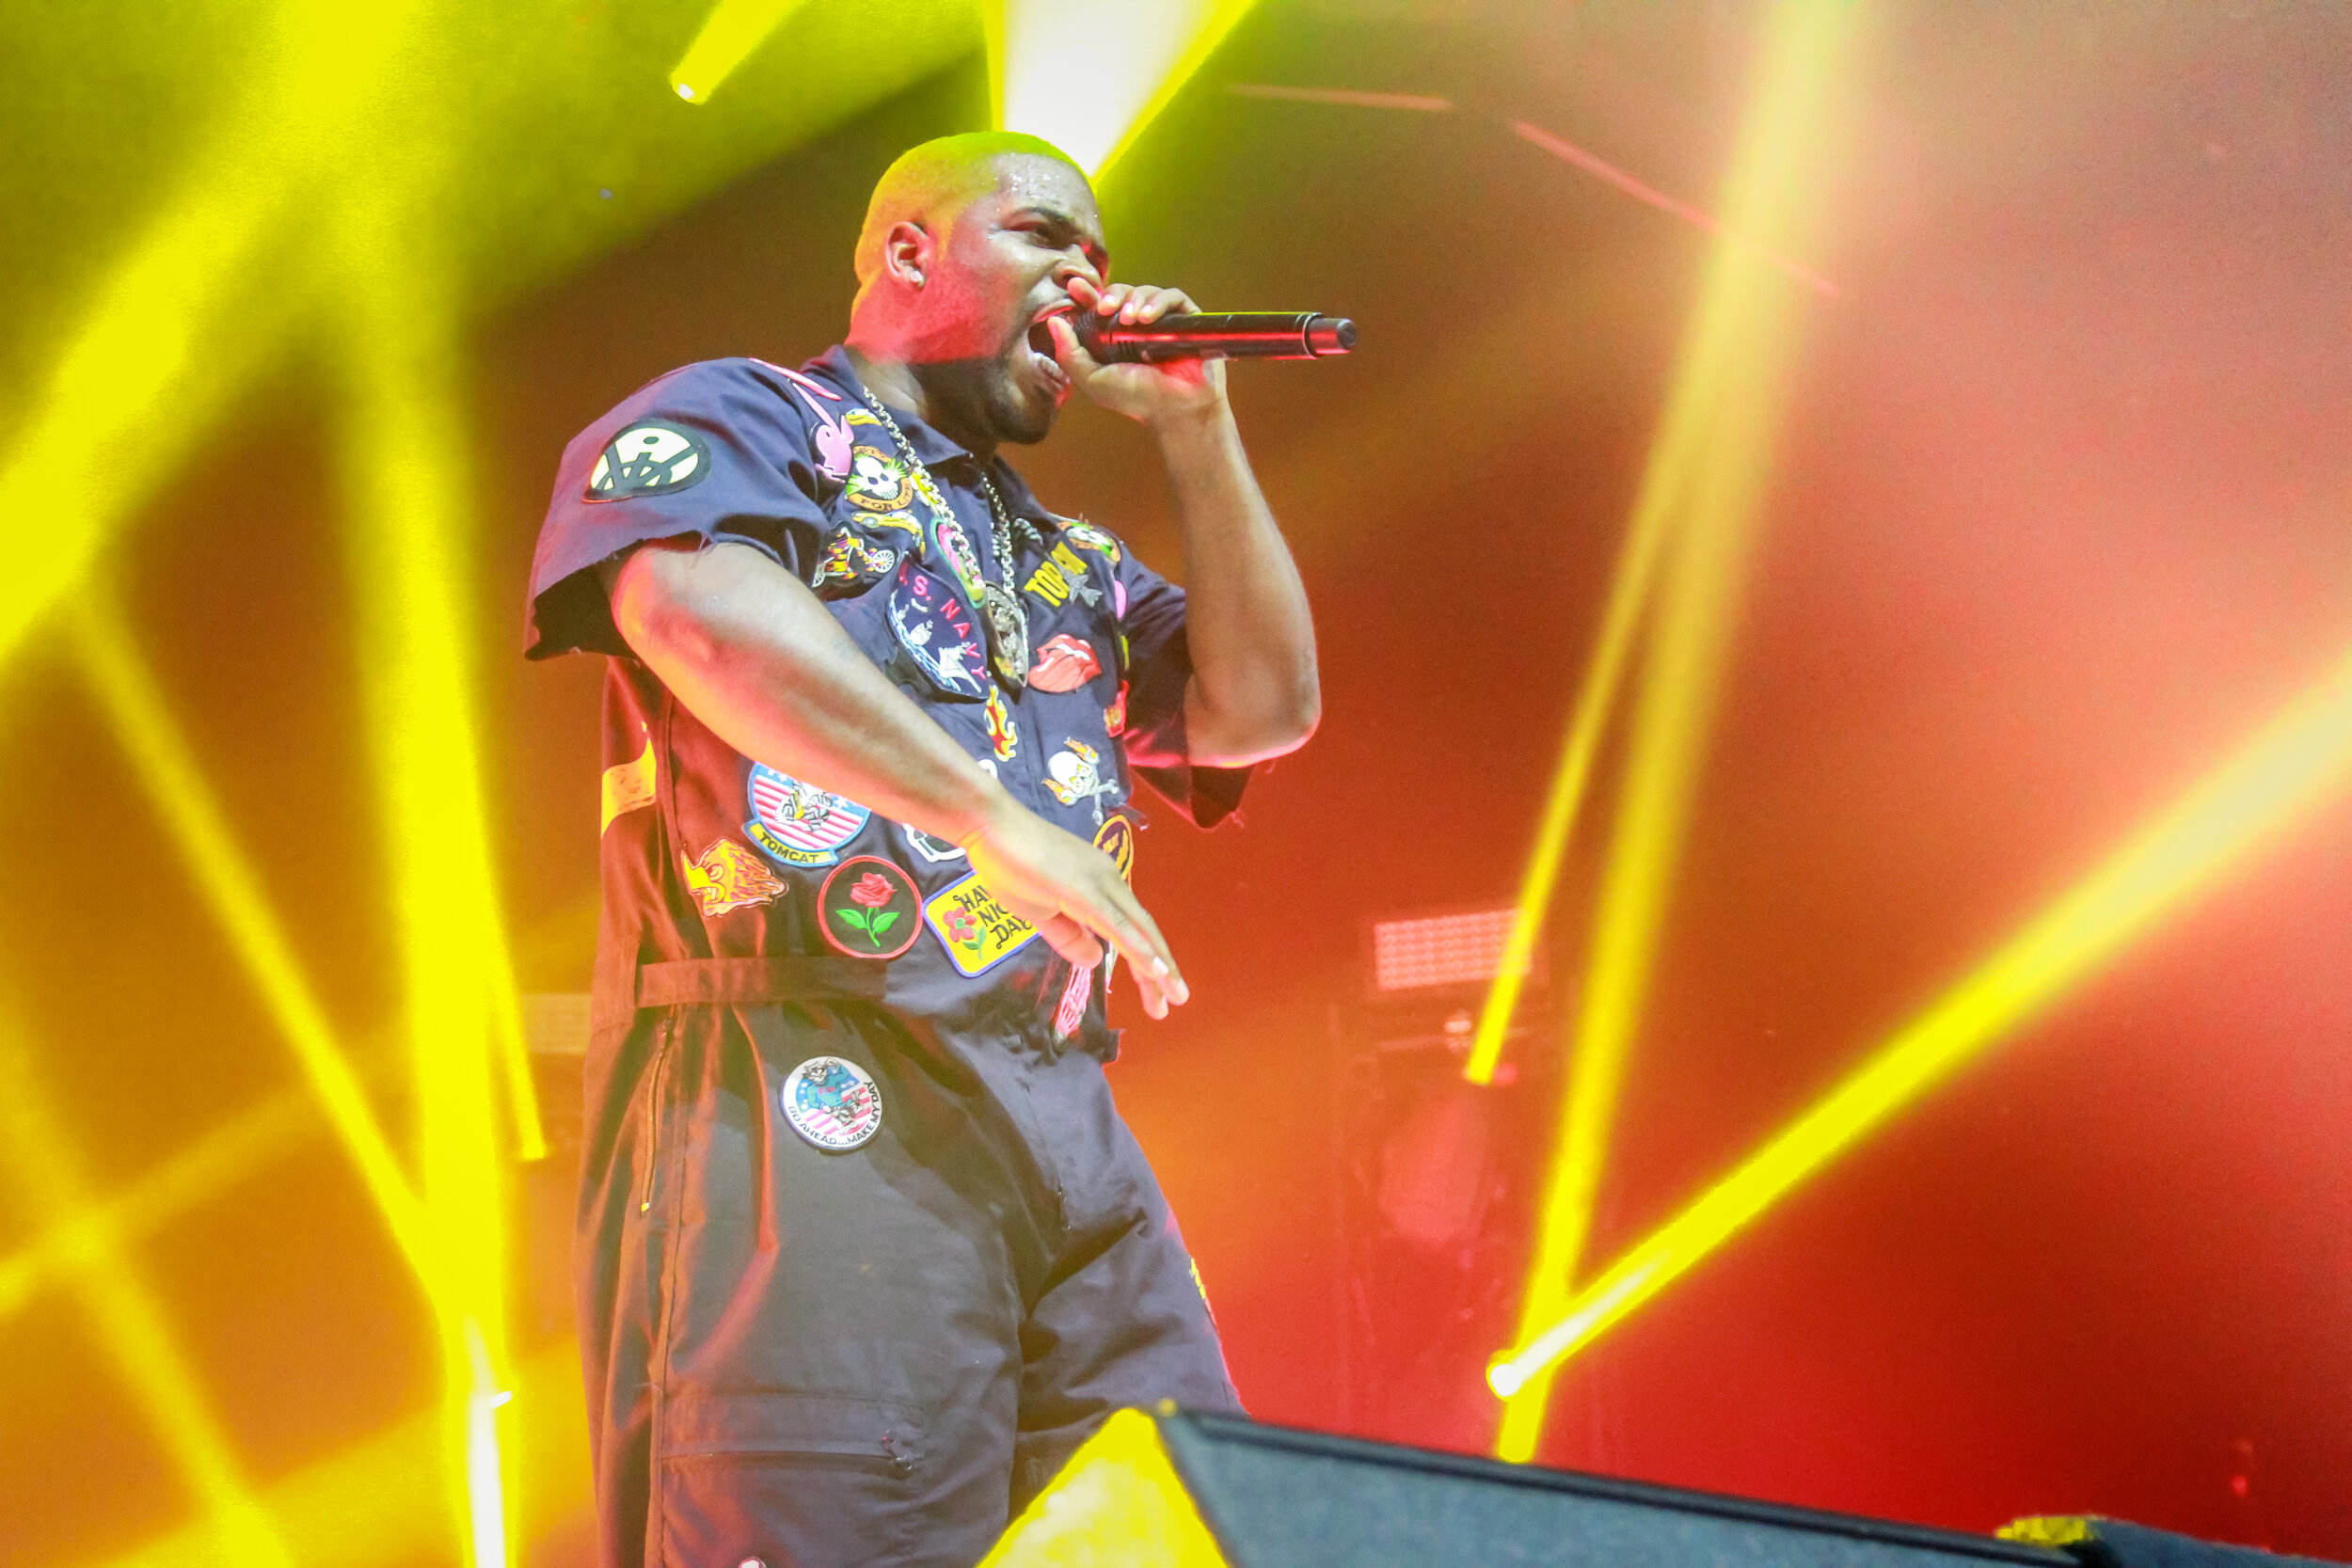 A$AP Ferg plays at the ACL Moody Theater, promoting his most-recent EP Floor Seats. He is well-known for being a member of the A$AP MOB.